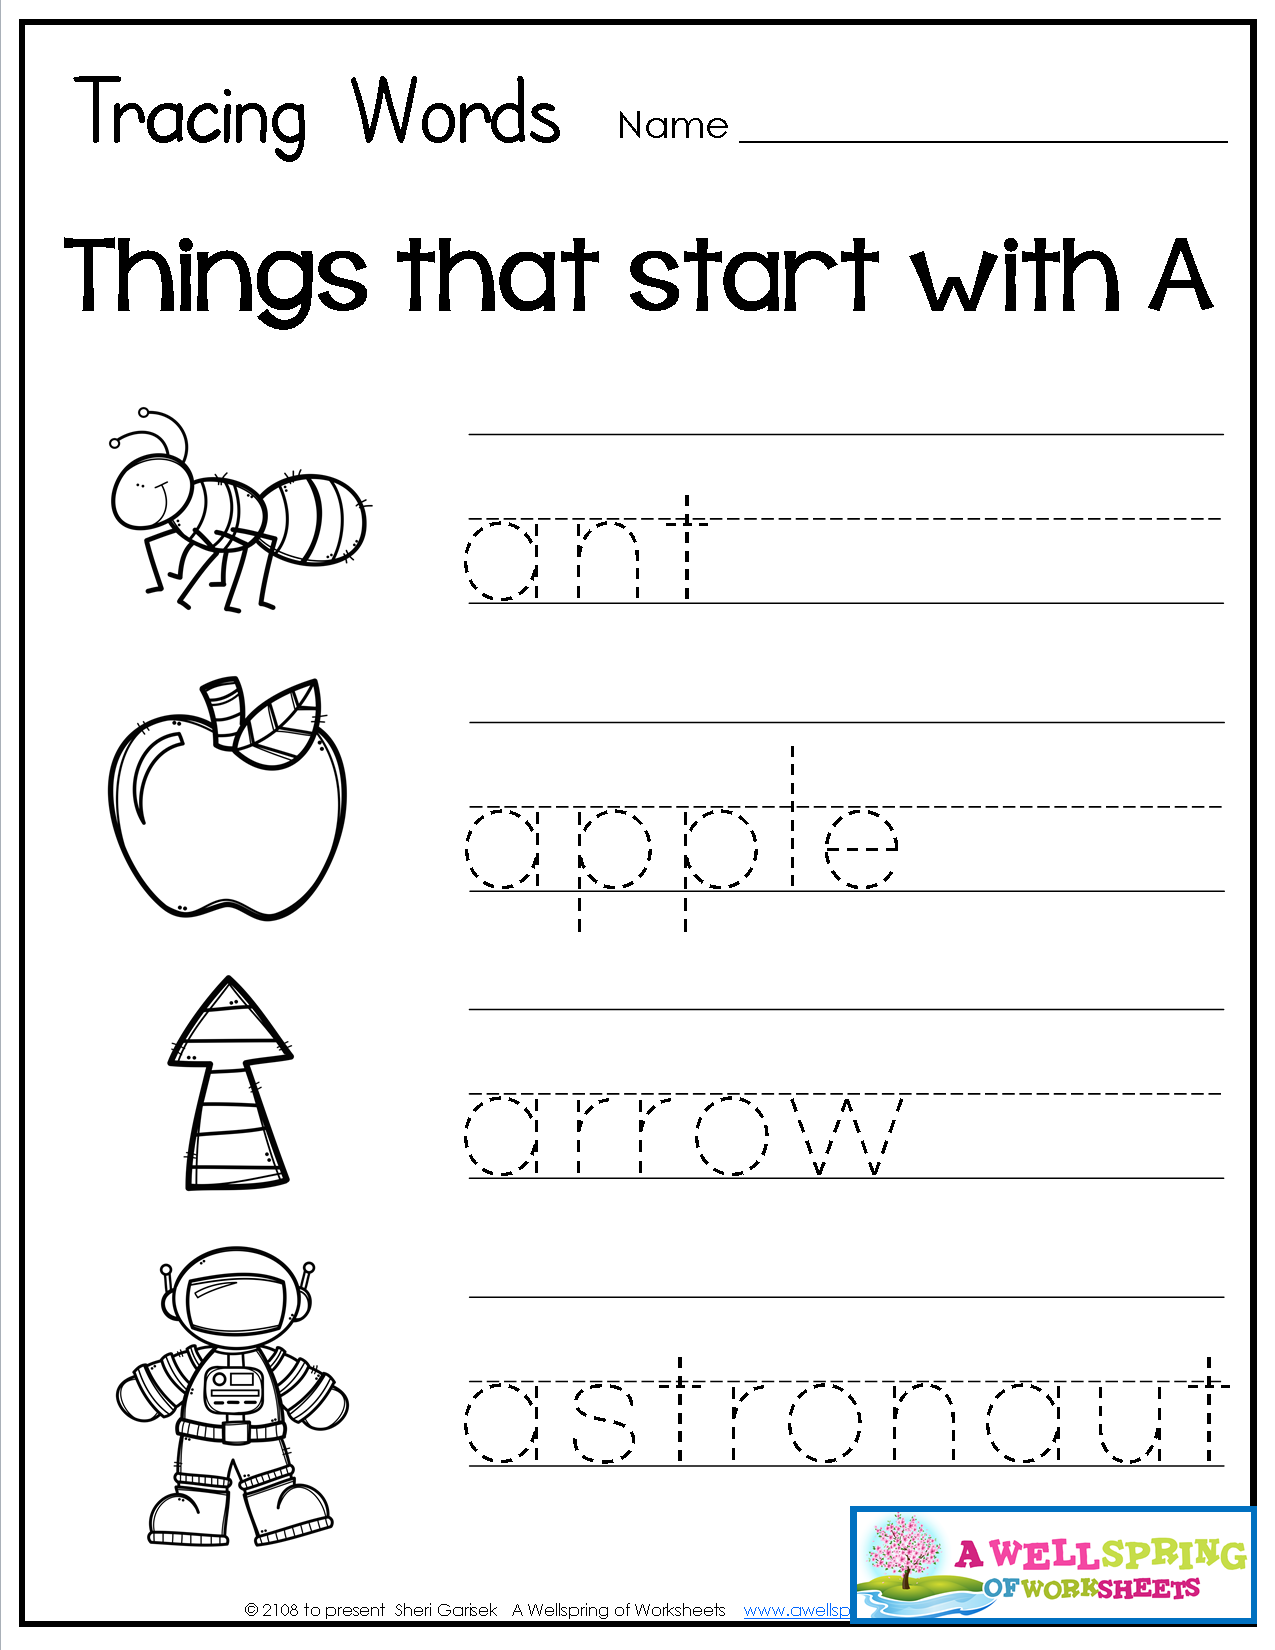 Tracing Words Things that Start with AZ Worksheets These worksheets